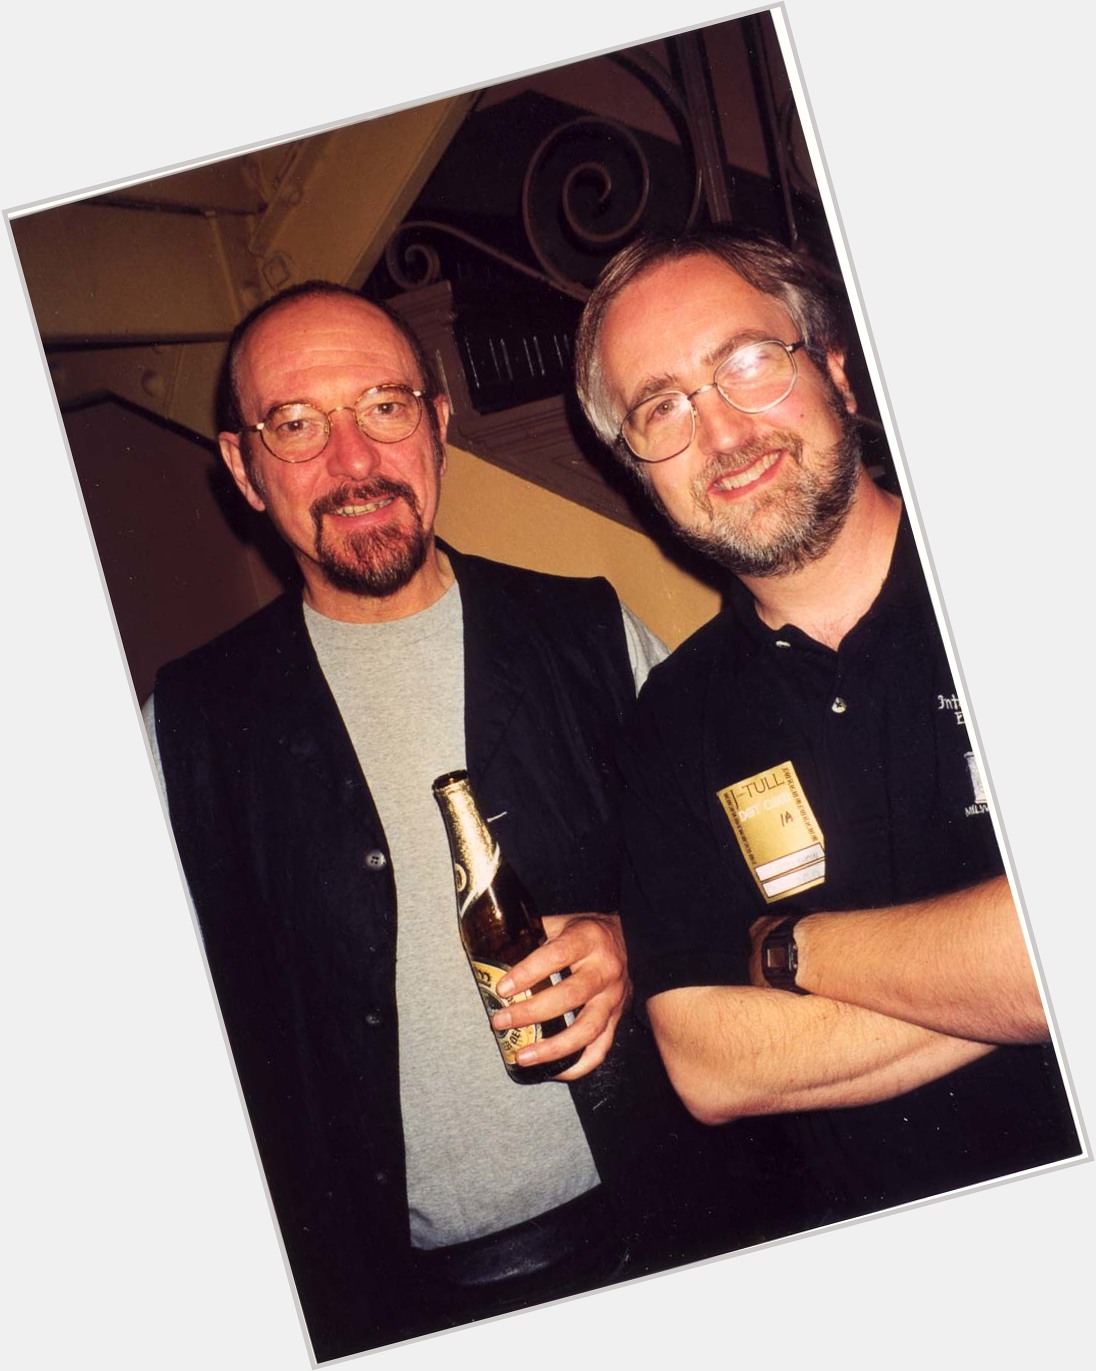 Happy 70th Birthday to IAN ANDERSON An inspiration and a friend (pic of us from 1999 Chicago). 